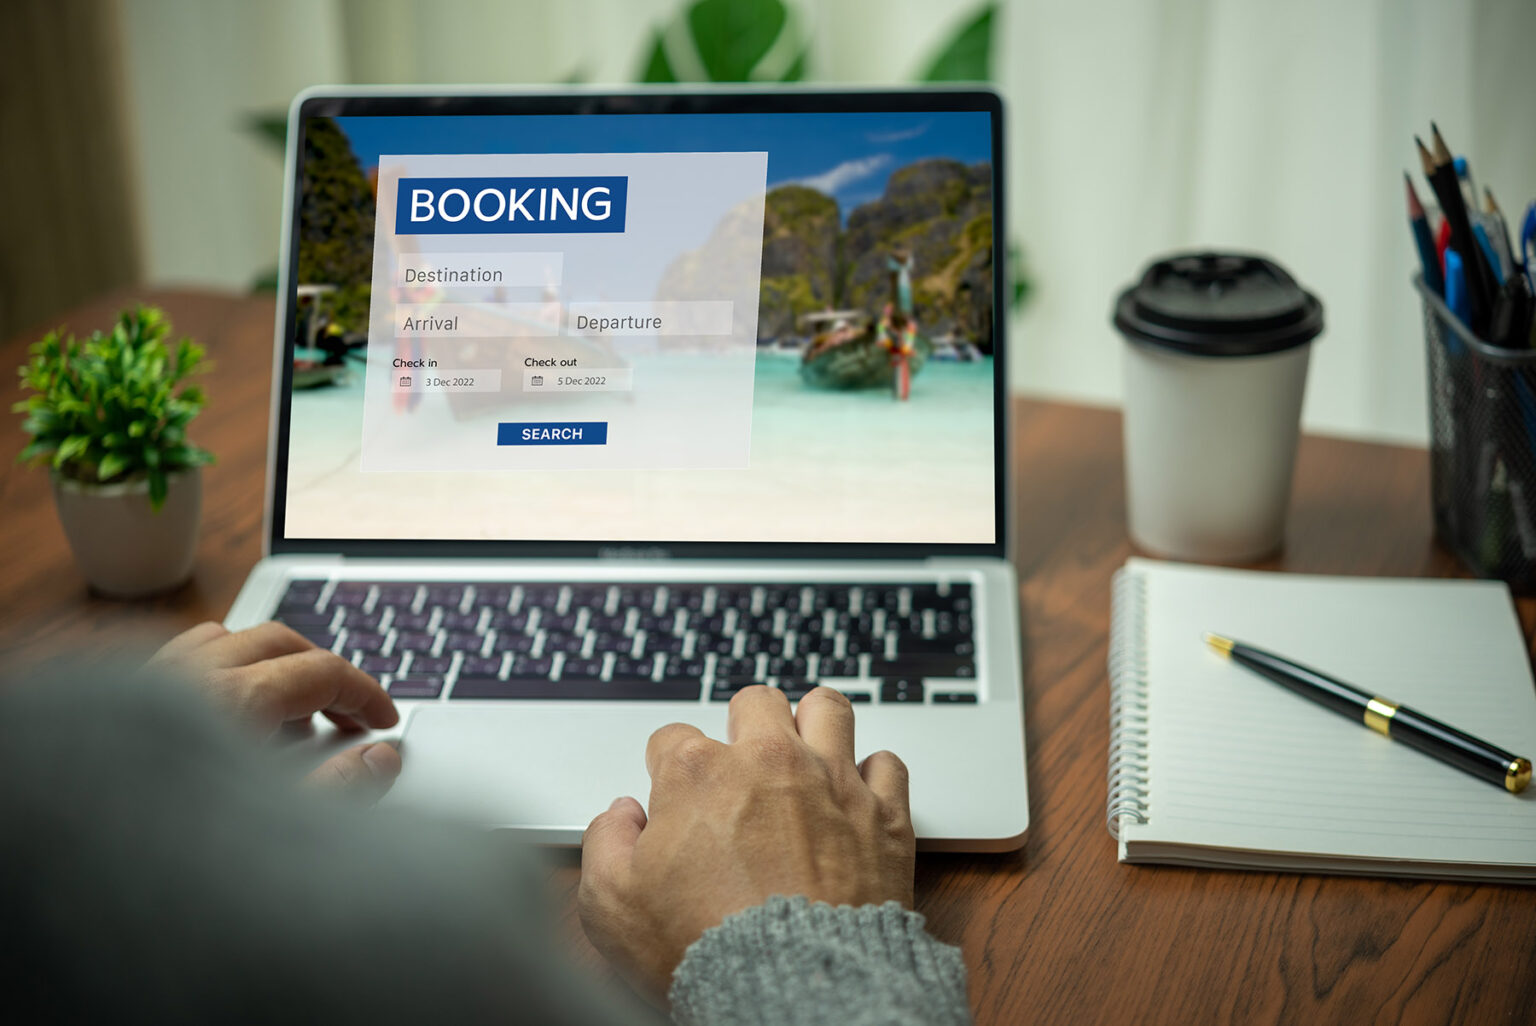 UNIQUE BENEFITS OF “BOOKING MASTER’S PROPERTY MANAGEMENT SYSTEM” FOR HOTEL GROUPS